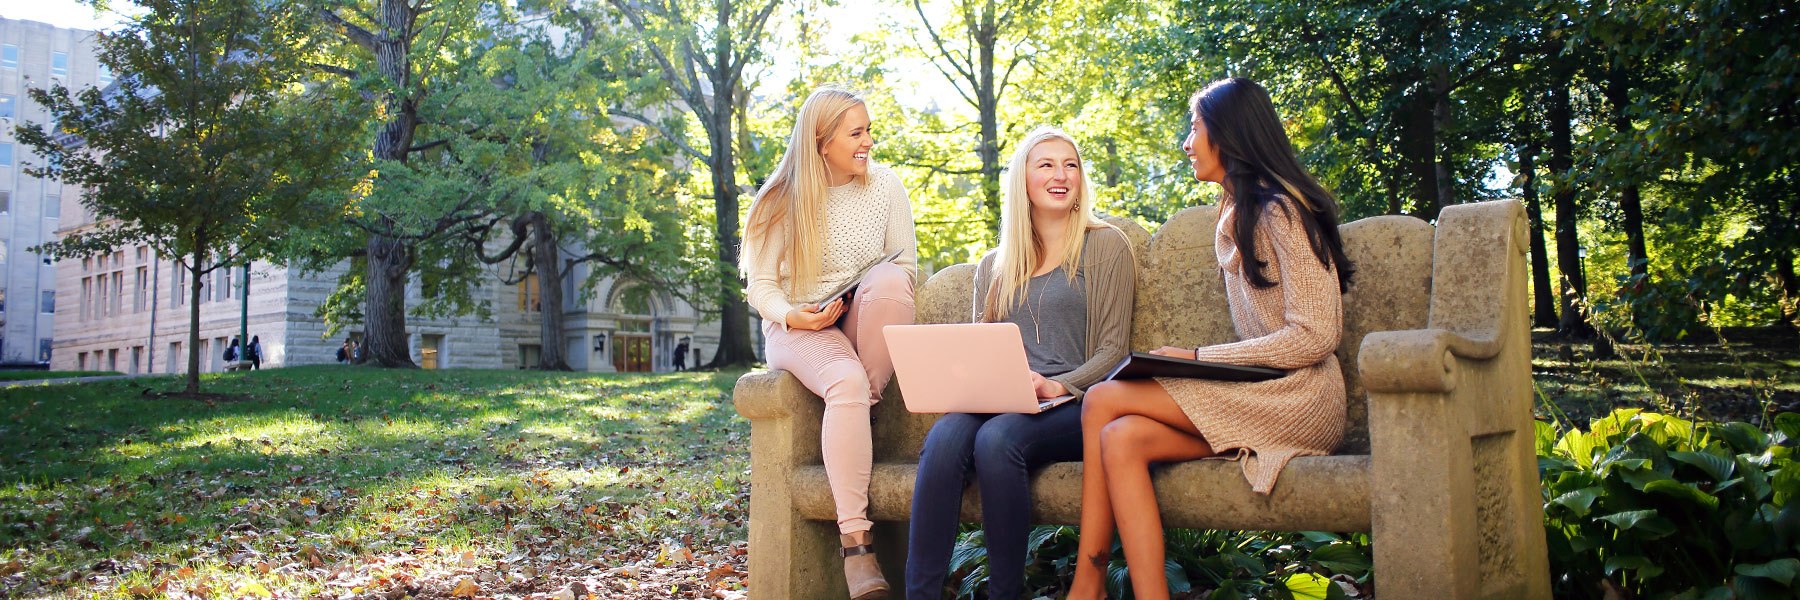 three students visit outdoors on campus